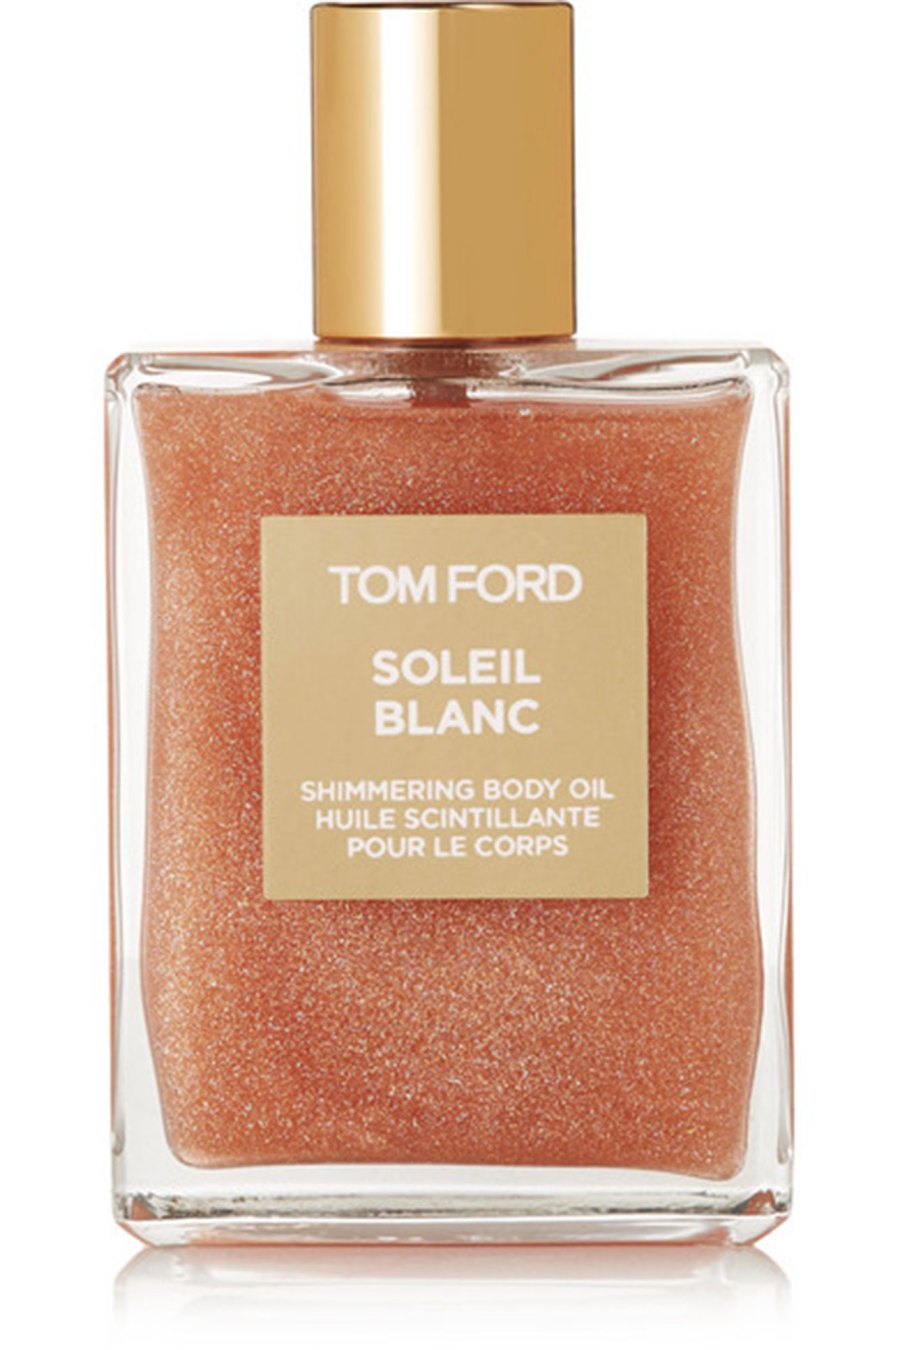 The Best Luxe Body Oils For a Hot Date Night